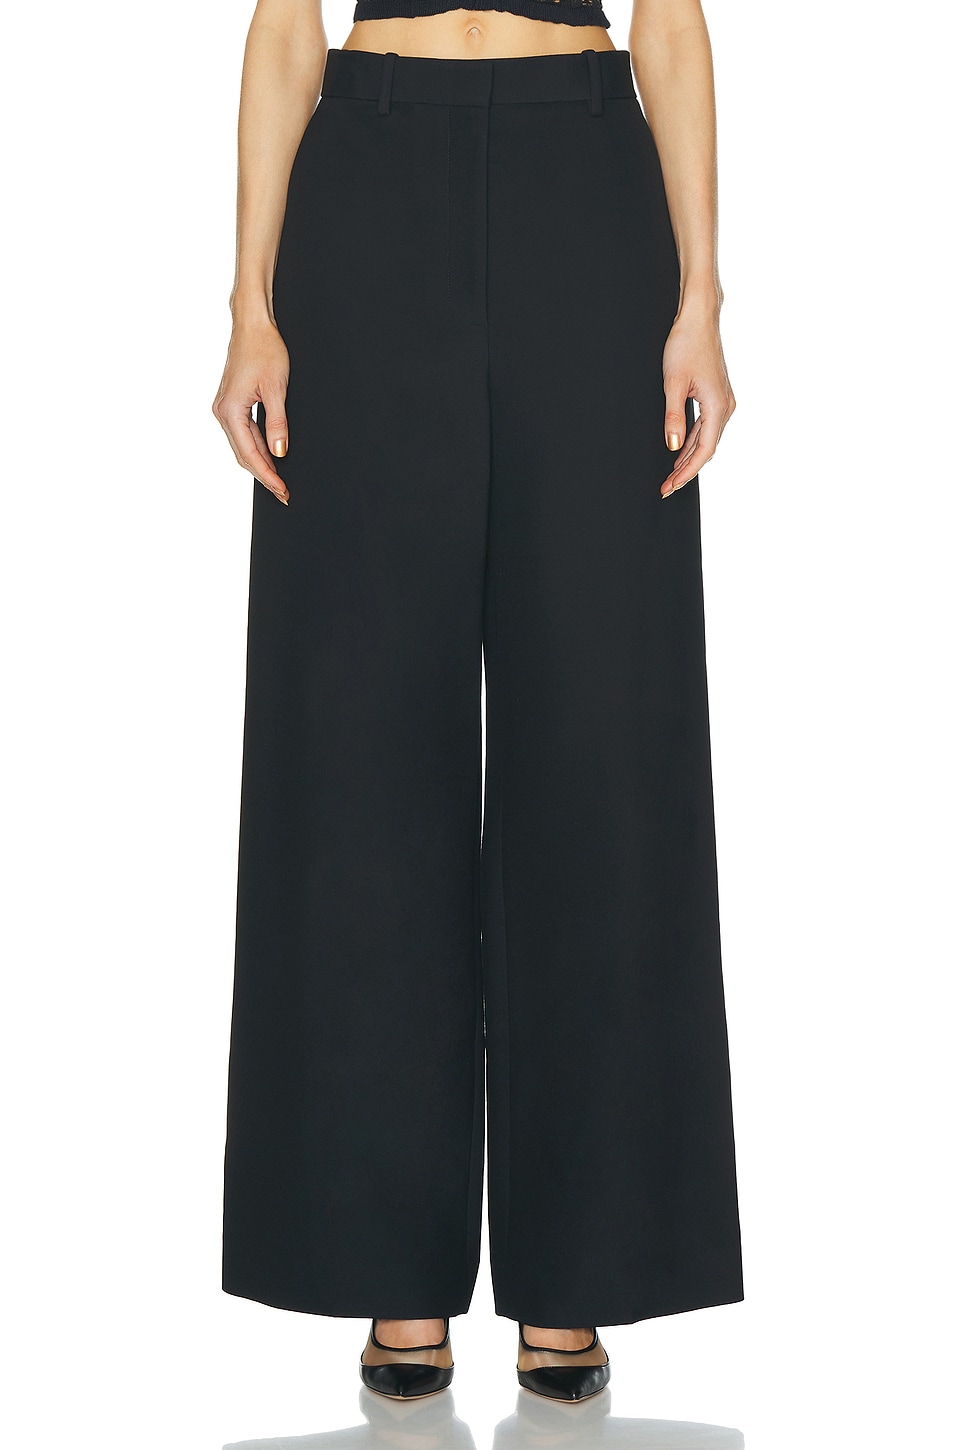 Image 1 of KHAITE Bacall Pant in Black